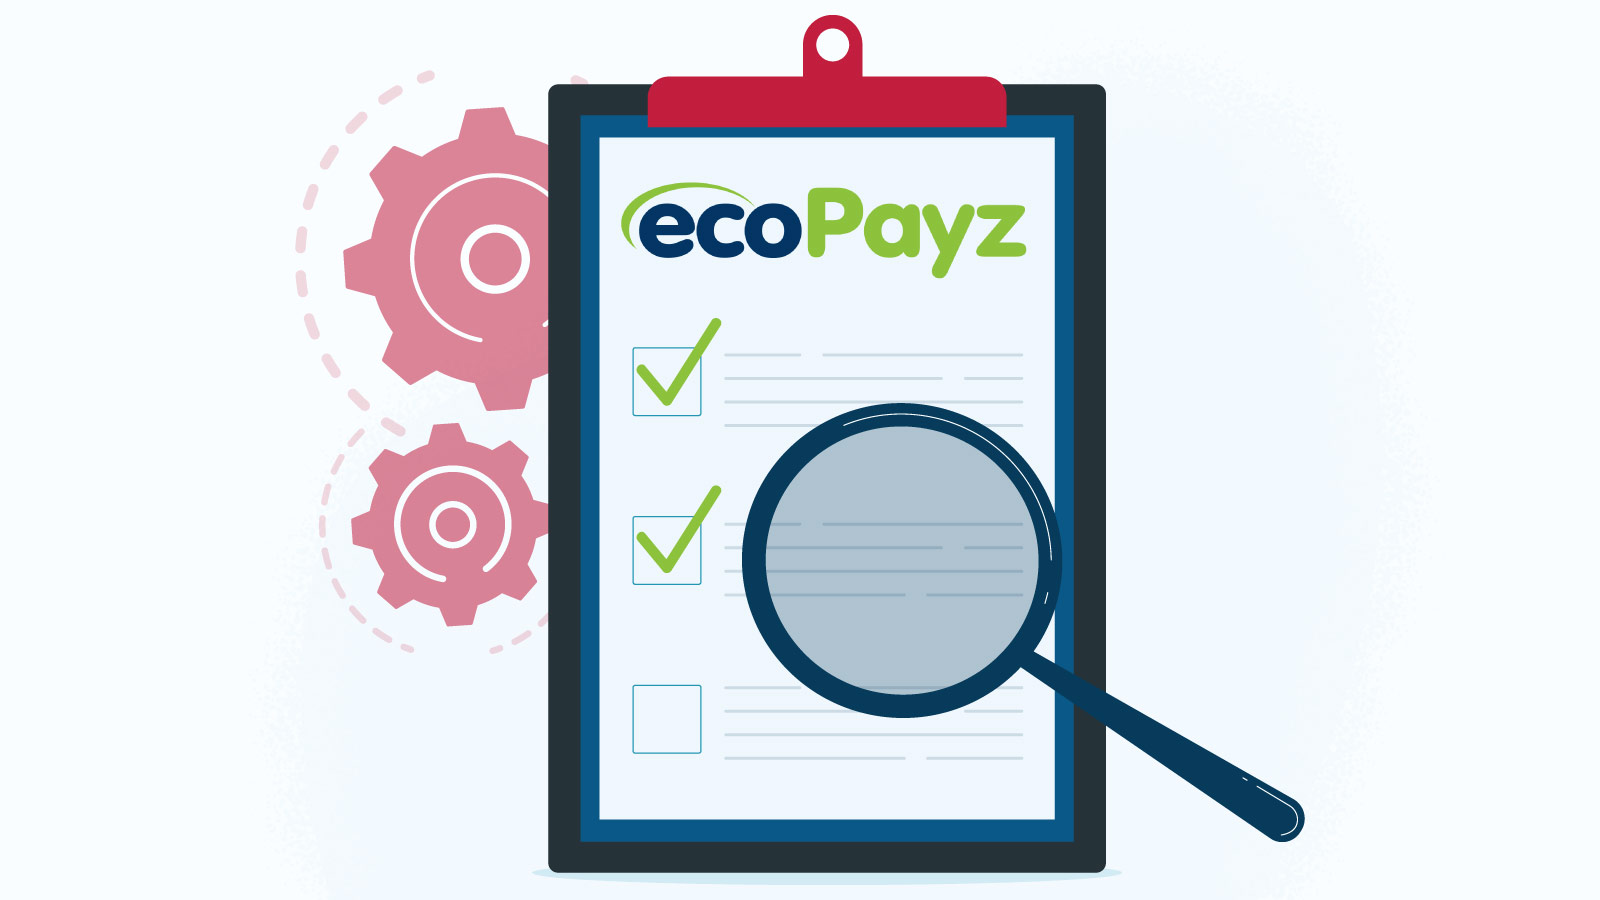 What to check before claiming bonuses with EcoPayz